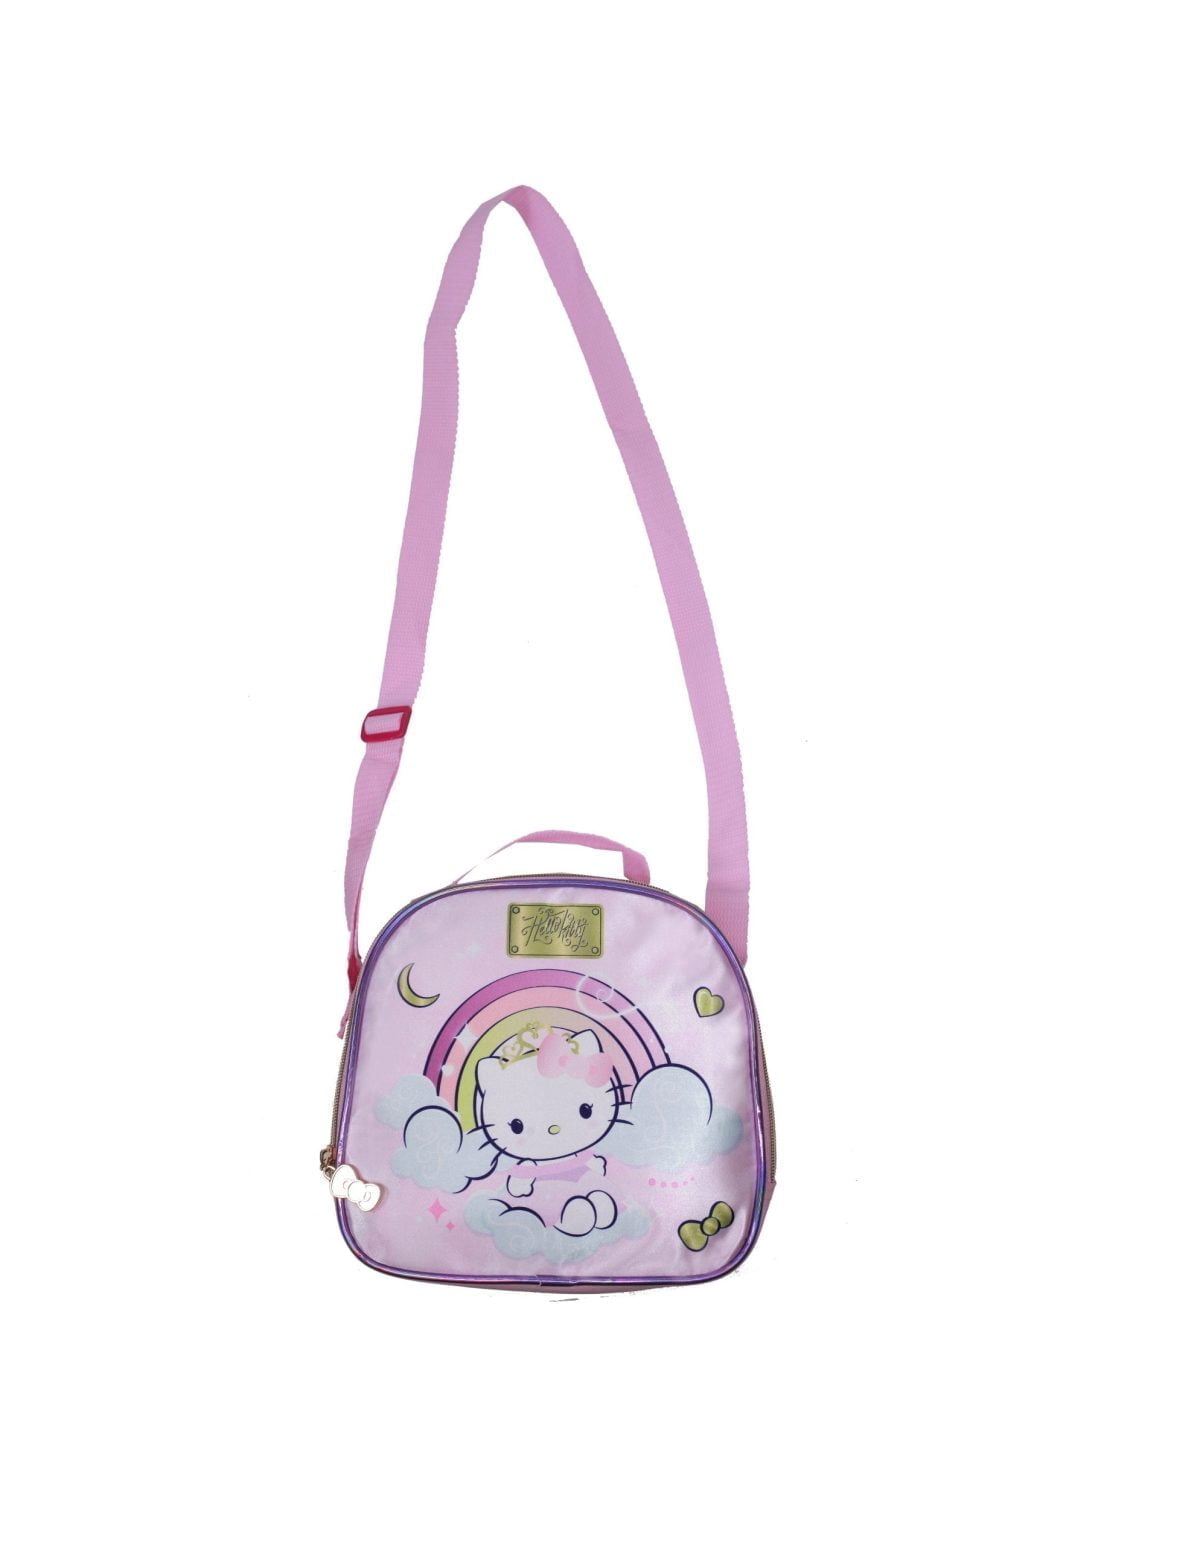 Hk675 230 1 Scaled Make Your Kids  Lunch More Fun By Using This Stylish Lunch Bag. This Spacious Bag Can Fit Most Standard Sized Lunch Boxes. Add More Flavor And Become The Center Of Attraction When You Take Out This Bag. &Amp;Lt;Ul&Amp;Gt; &Amp;Lt;Li&Amp;Gt;Stylish Lunch Bag&Amp;Lt;/Li&Amp;Gt; &Amp;Lt;Li&Amp;Gt;Spacious&Amp;Lt;/Li&Amp;Gt; &Amp;Lt;Li&Amp;Gt;Can Fit Most Standard Lunch Boxes&Amp;Lt;/Li&Amp;Gt; &Amp;Lt;/Ul&Amp;Gt; Hello Kitty Hello Kitty Insulated Lunch Bag (Hk675)